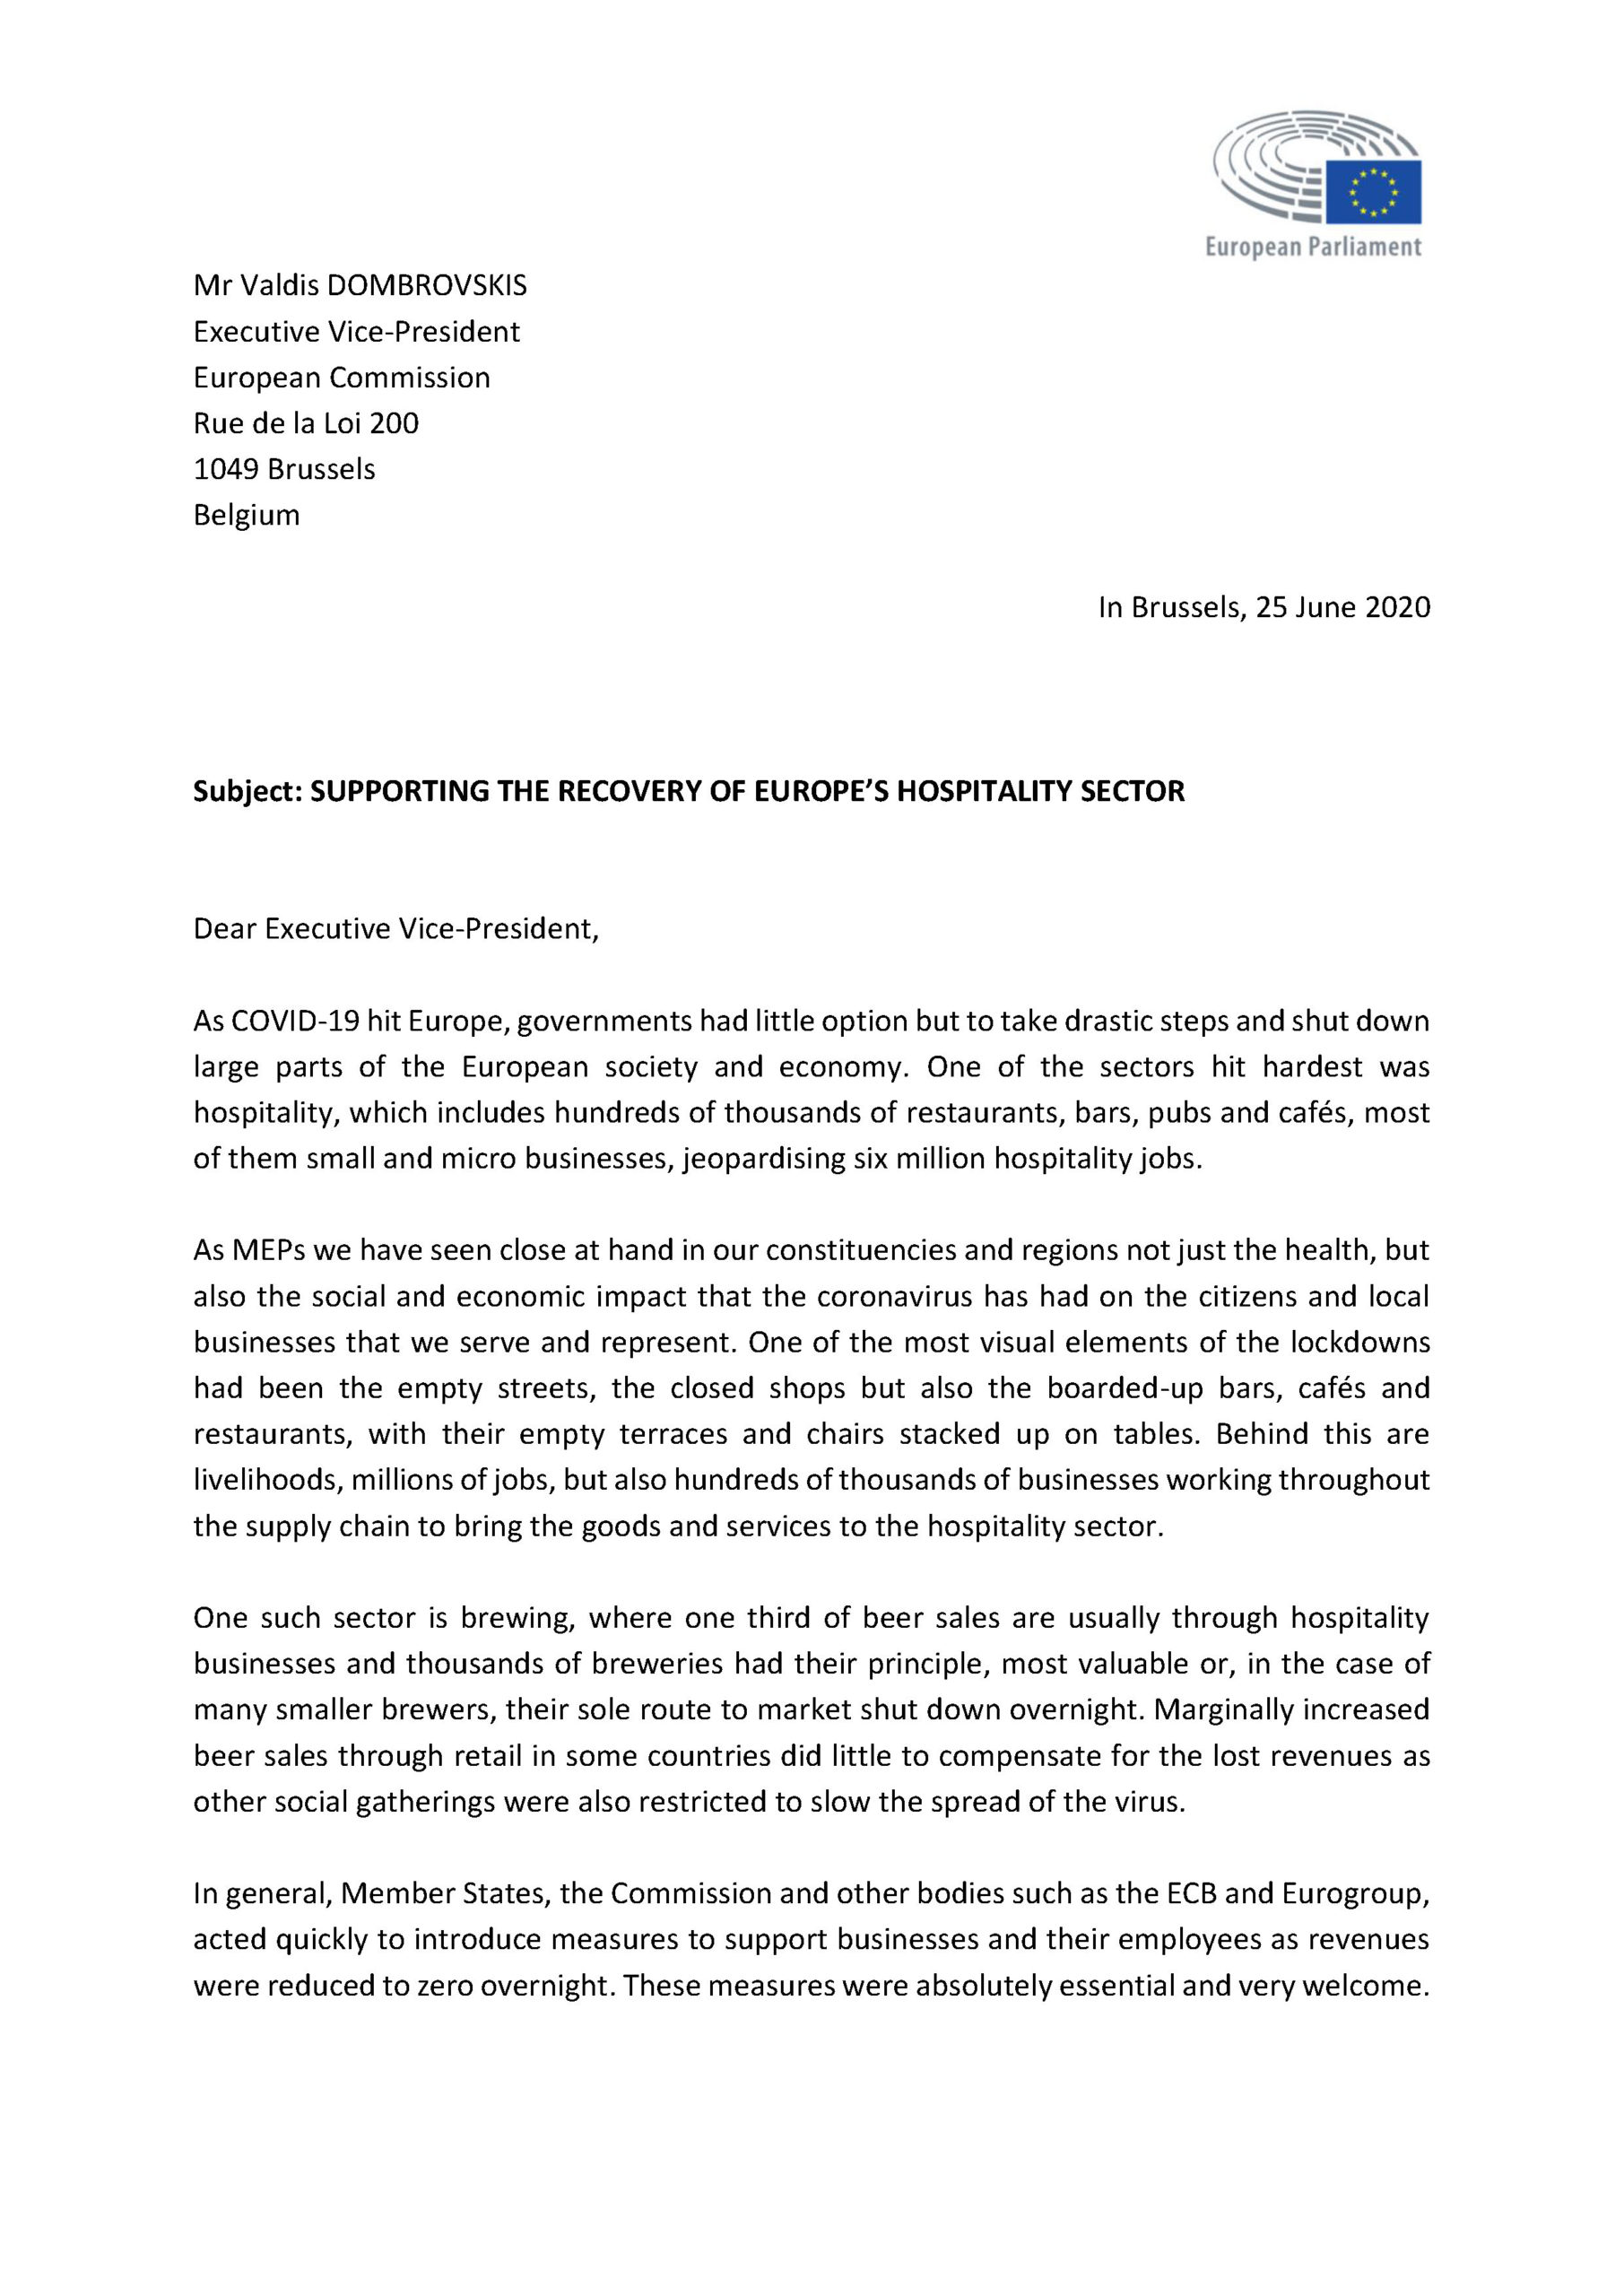 Letter on supporting the recovery of Europe's hospitality sector - page 1